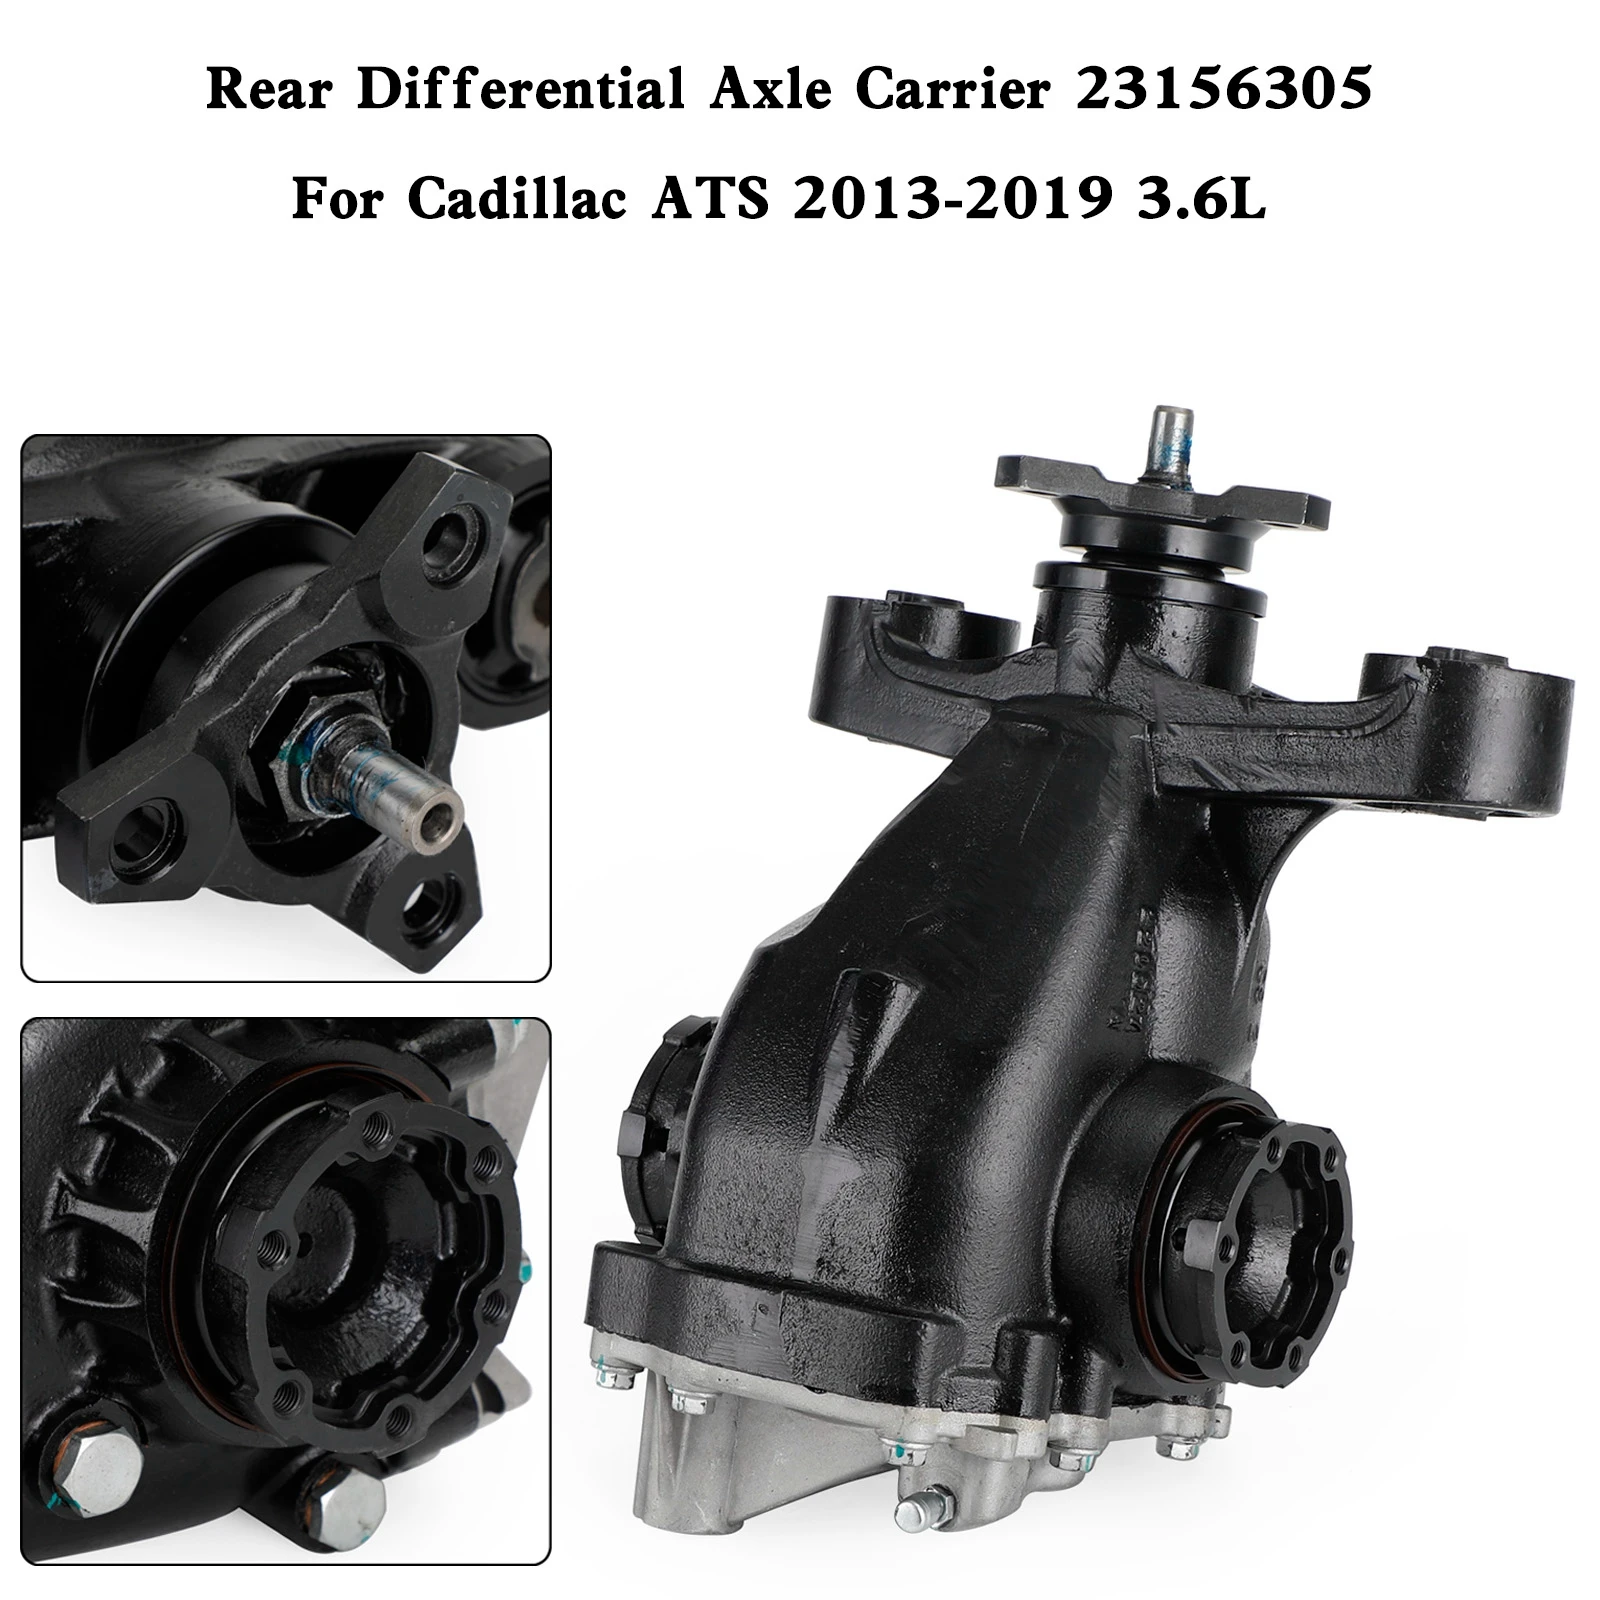 

Topteng Differential Axle Carrier 23156305 For Cadillac ATS 2013-2019 3.6L